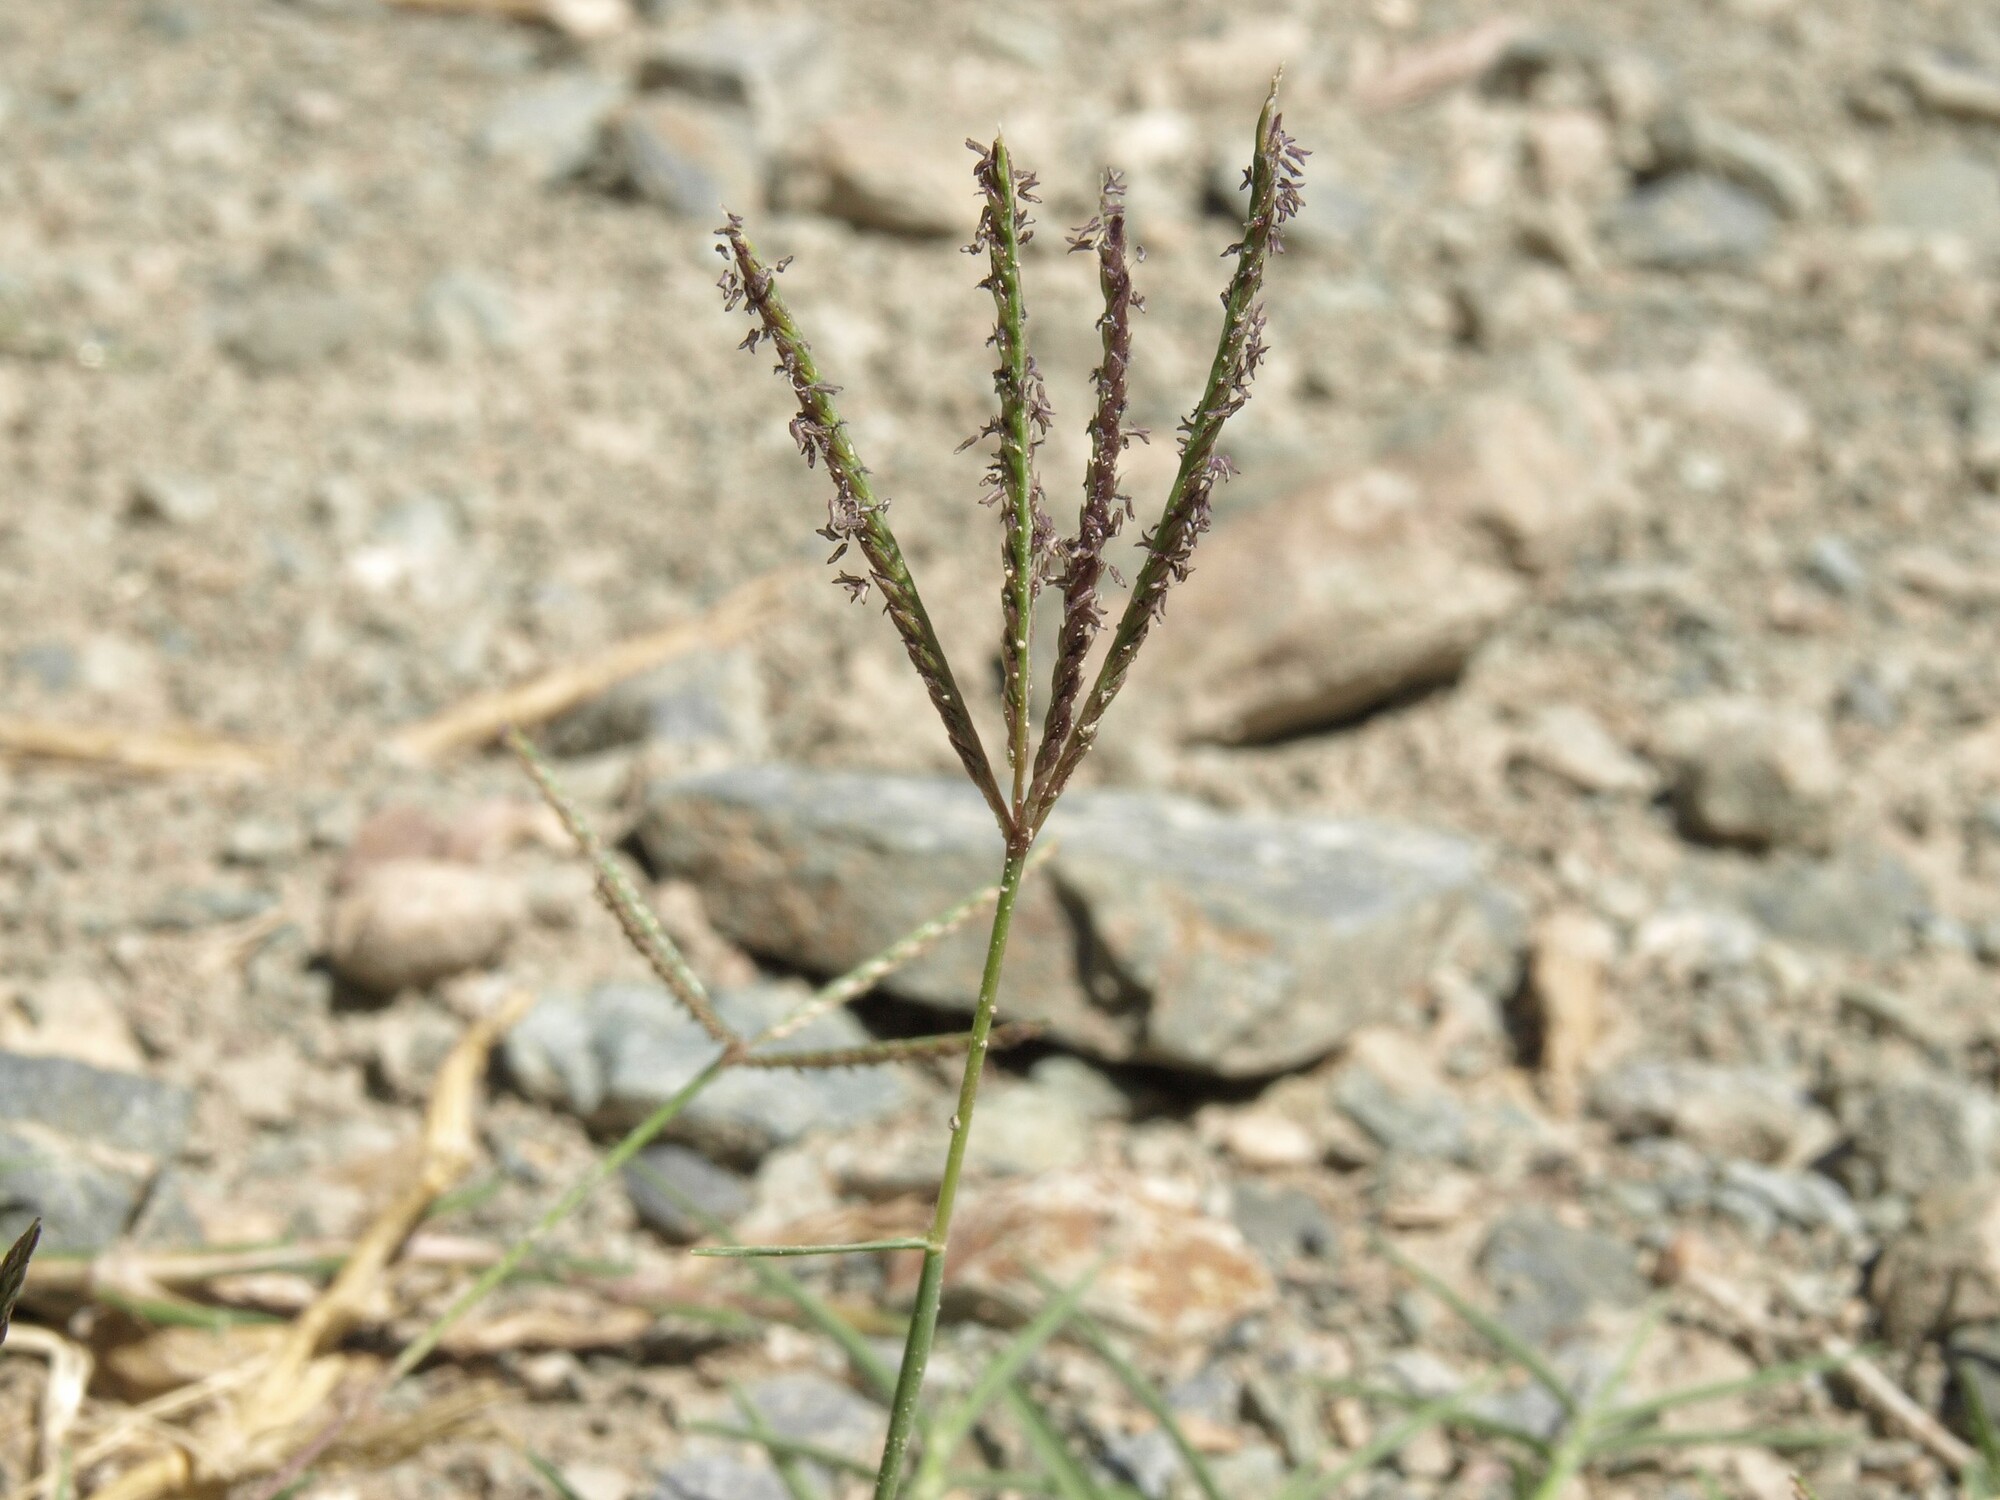 Photograph showing the inflorescence of a Bermuda grass plant growing in rocky soil. The photo shows an inflorescence made up of four branches radiating from a single point. Anthers are handing out of the spikelets on the inflorescence branches.